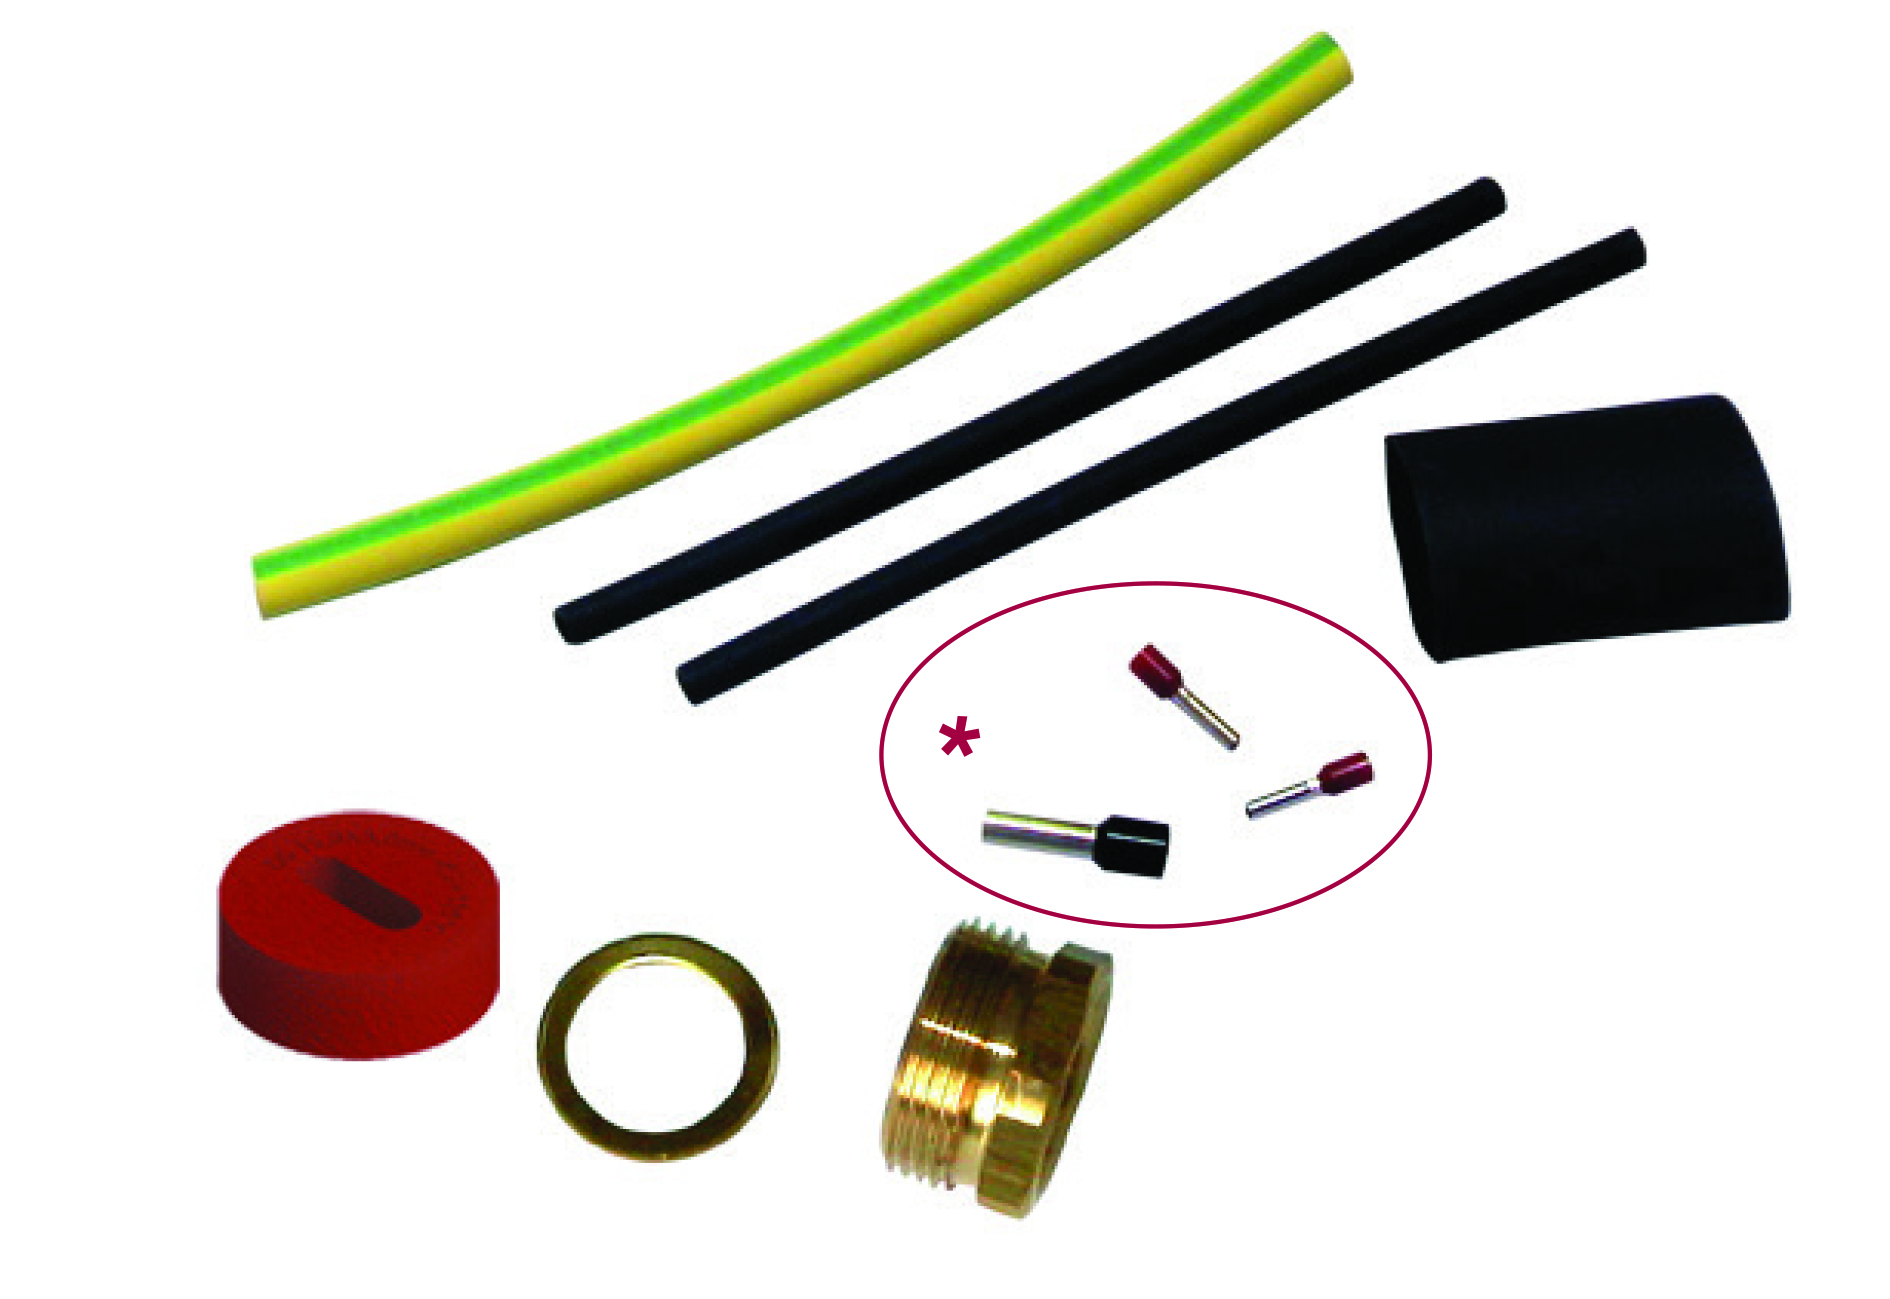 Connection kit Pipe Mounting for Raychem Cables: 3BTV-5BTV-10QTVR-15QTVR-XTV-VPL 5x11 - w/Terminatio